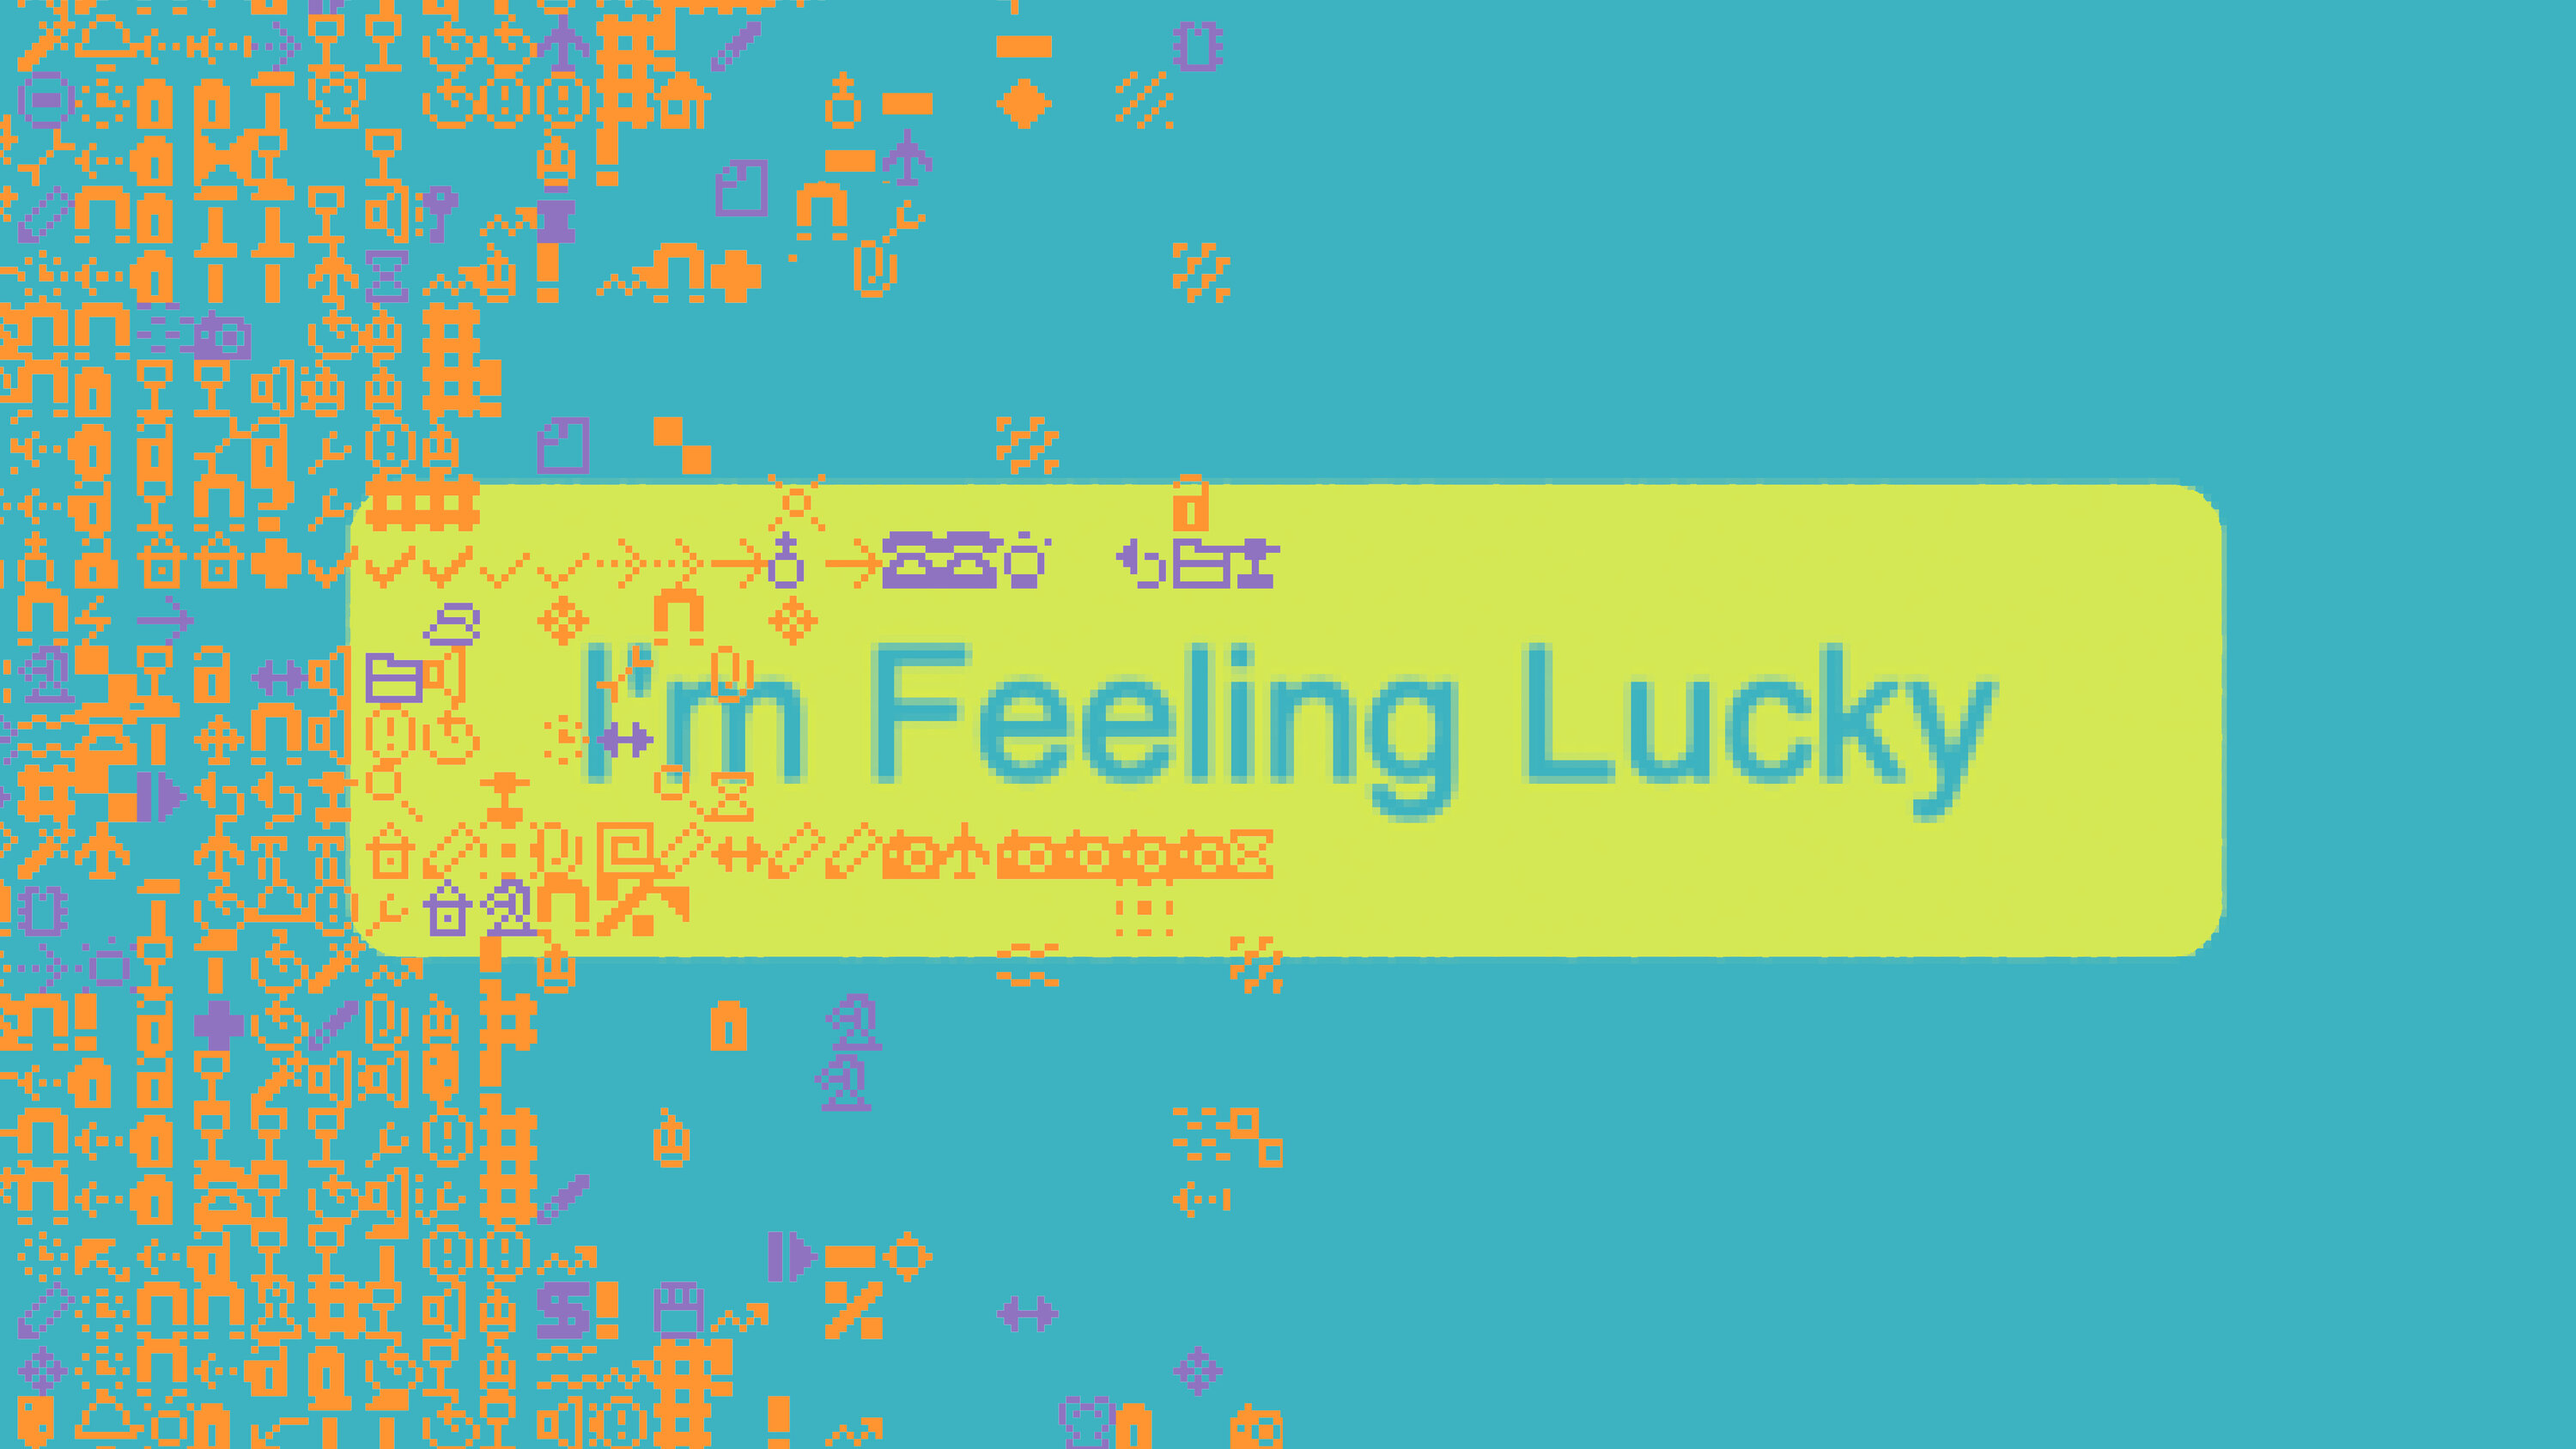 A digital, glitchy aesthetic with the "I'm Feeling Lucky" button prominently displayed against a vibrant background.